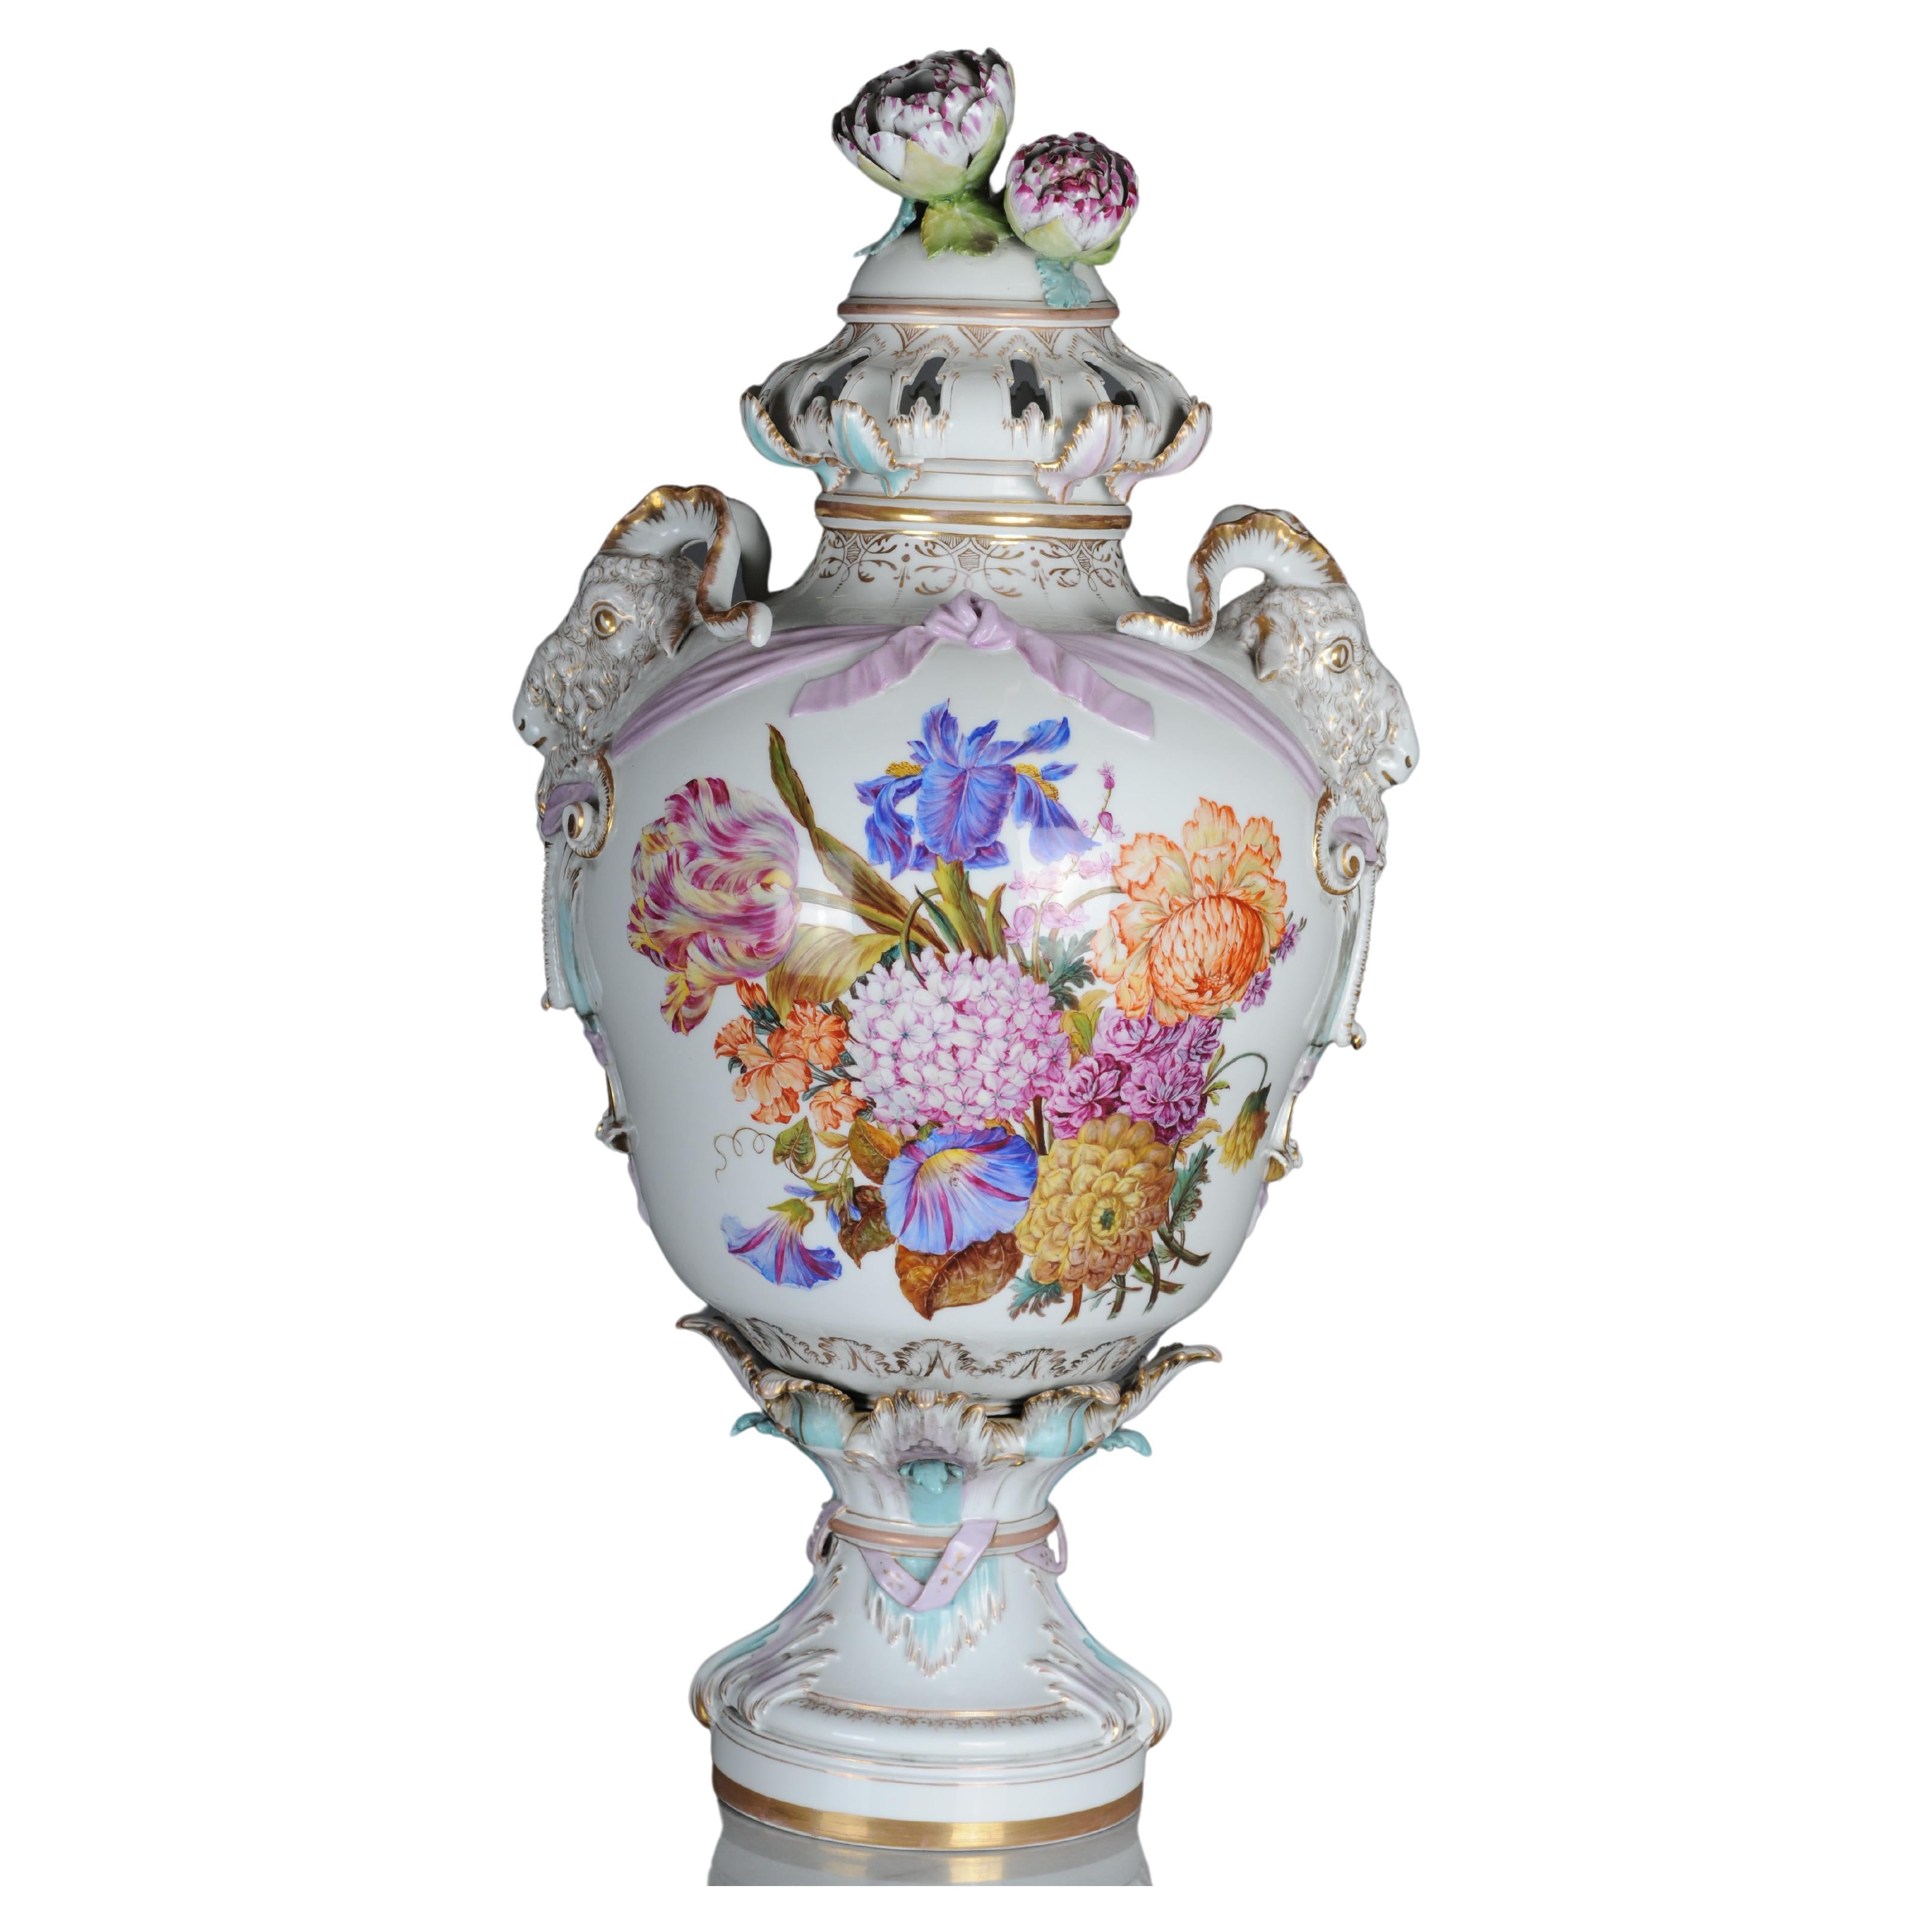 Antique KPM Berlin potpourri vases with Watteau scenes around 1830, 64 cm

Painted on both sides. Rich naturalistic flower painting and hunting scene in an idyllic landscape.

Porcelain, decorated with colors and gold. Bulbous body with plastic ram